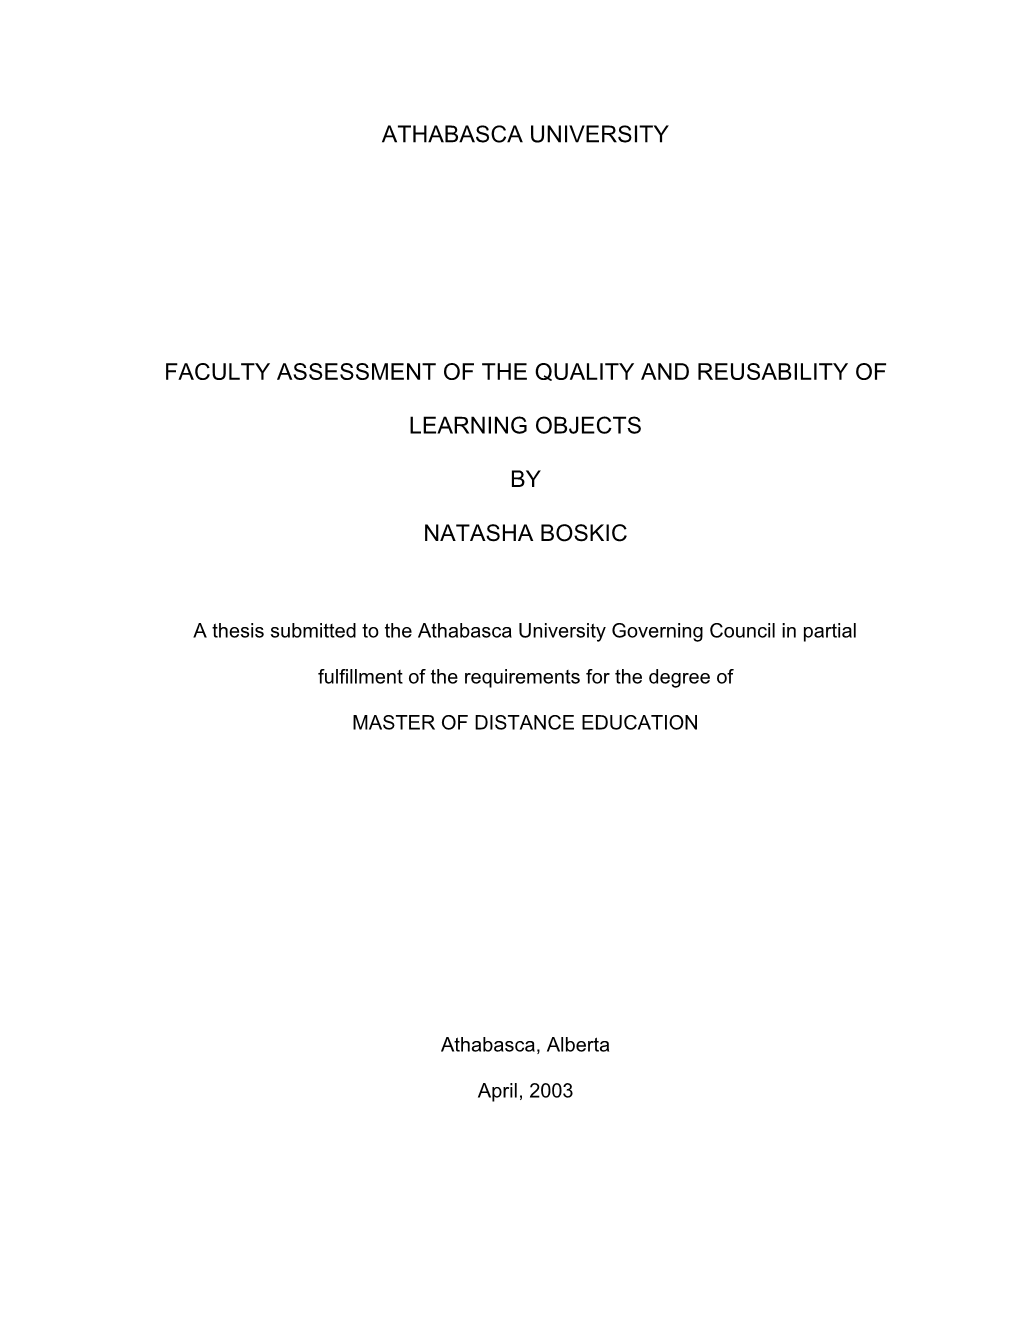 Athabasca University Faculty Assessment of the Quality